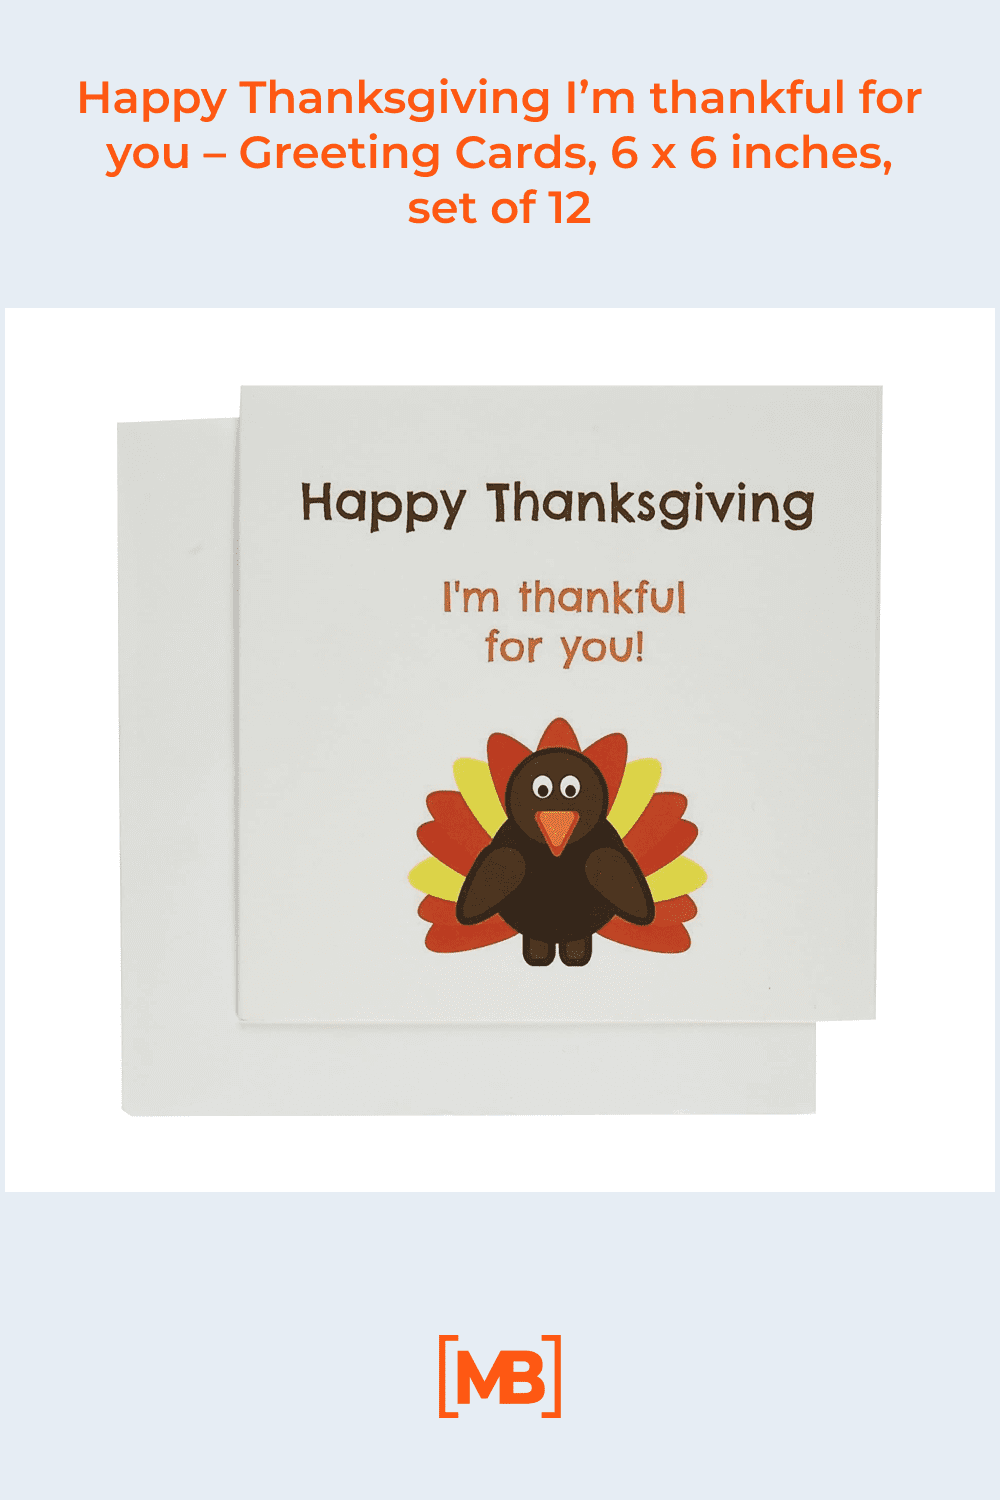 Happy Thanksgiving I’m thankful for you - Greeting Cards, 6 x 6 inches.